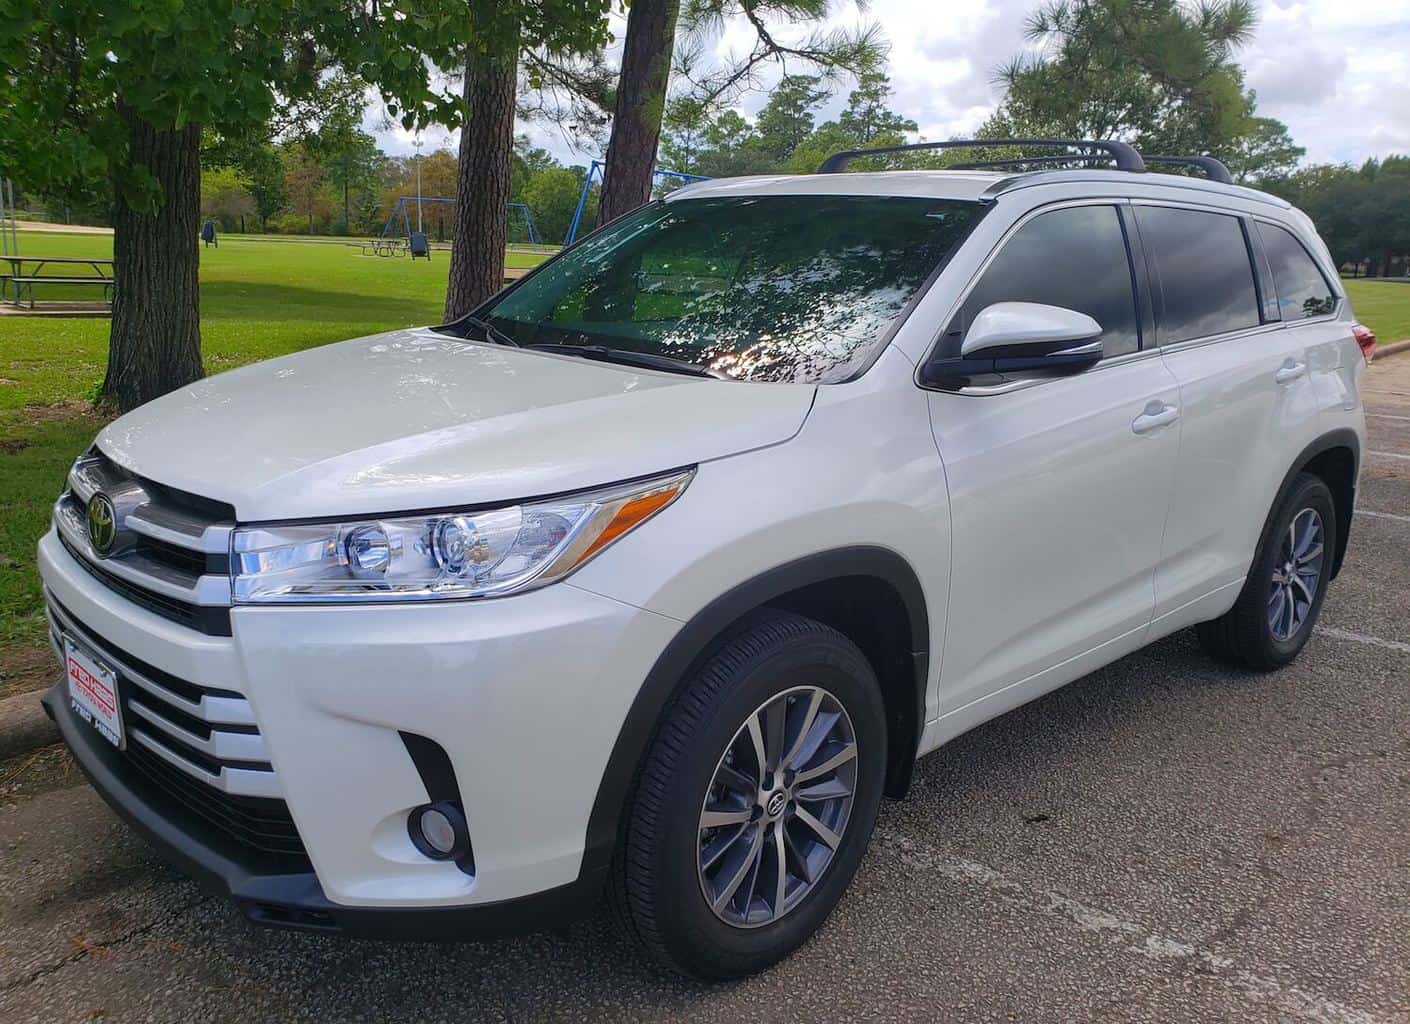 2018 Toyota Highlander XLE Packs A Lot of Cargo and Passengers Photo Gallery